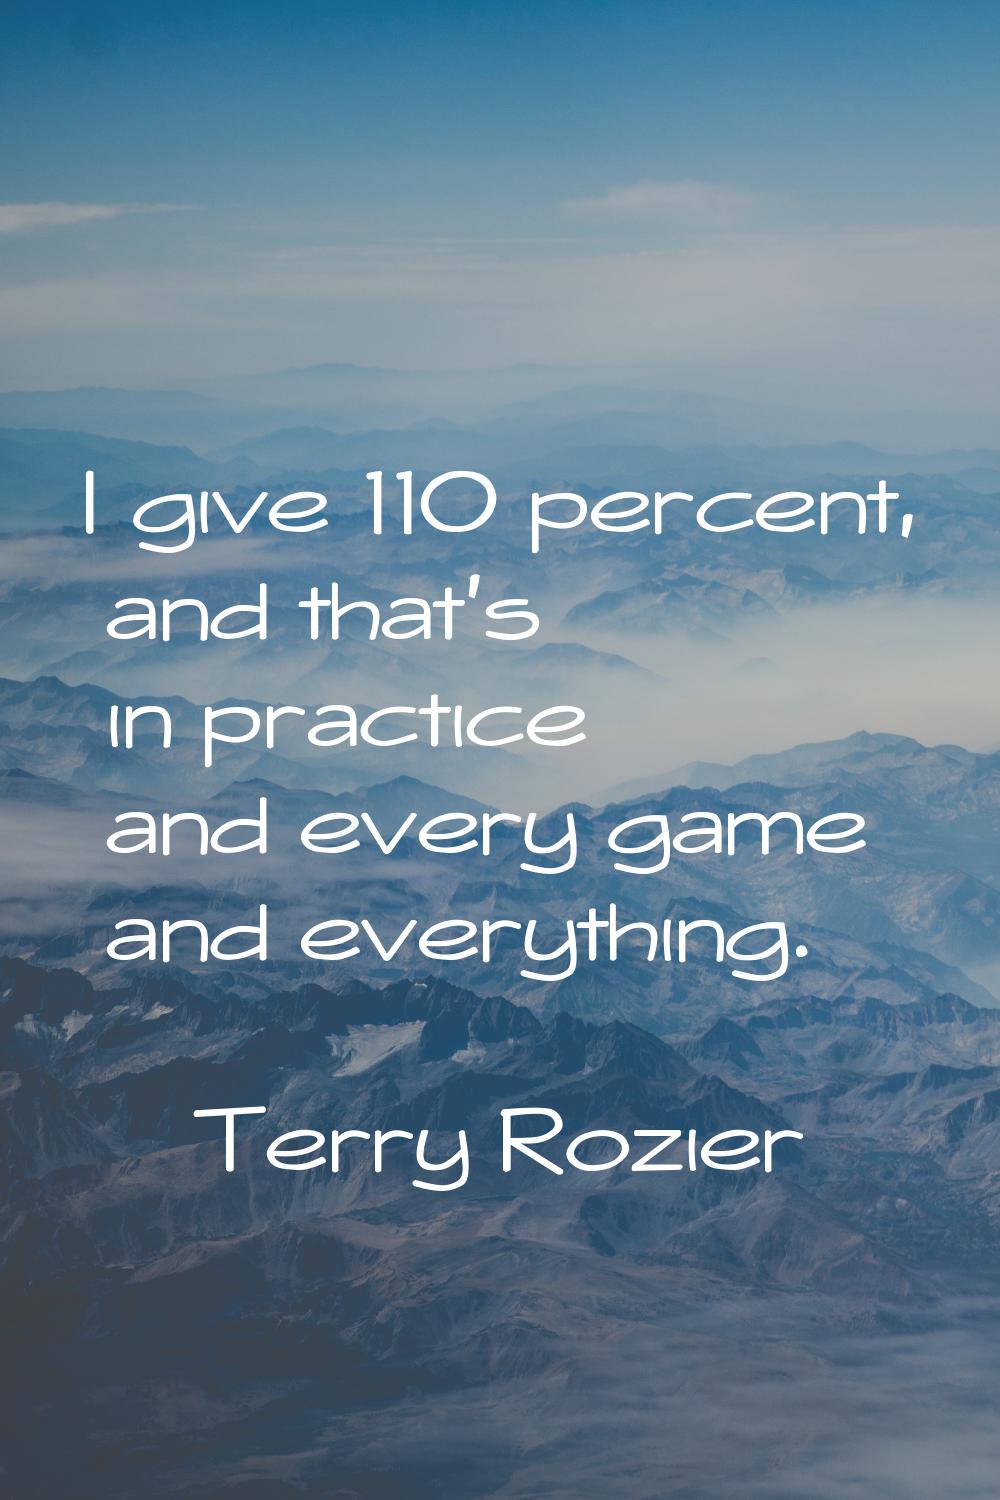 I give 110 percent, and that's in practice and every game and everything.